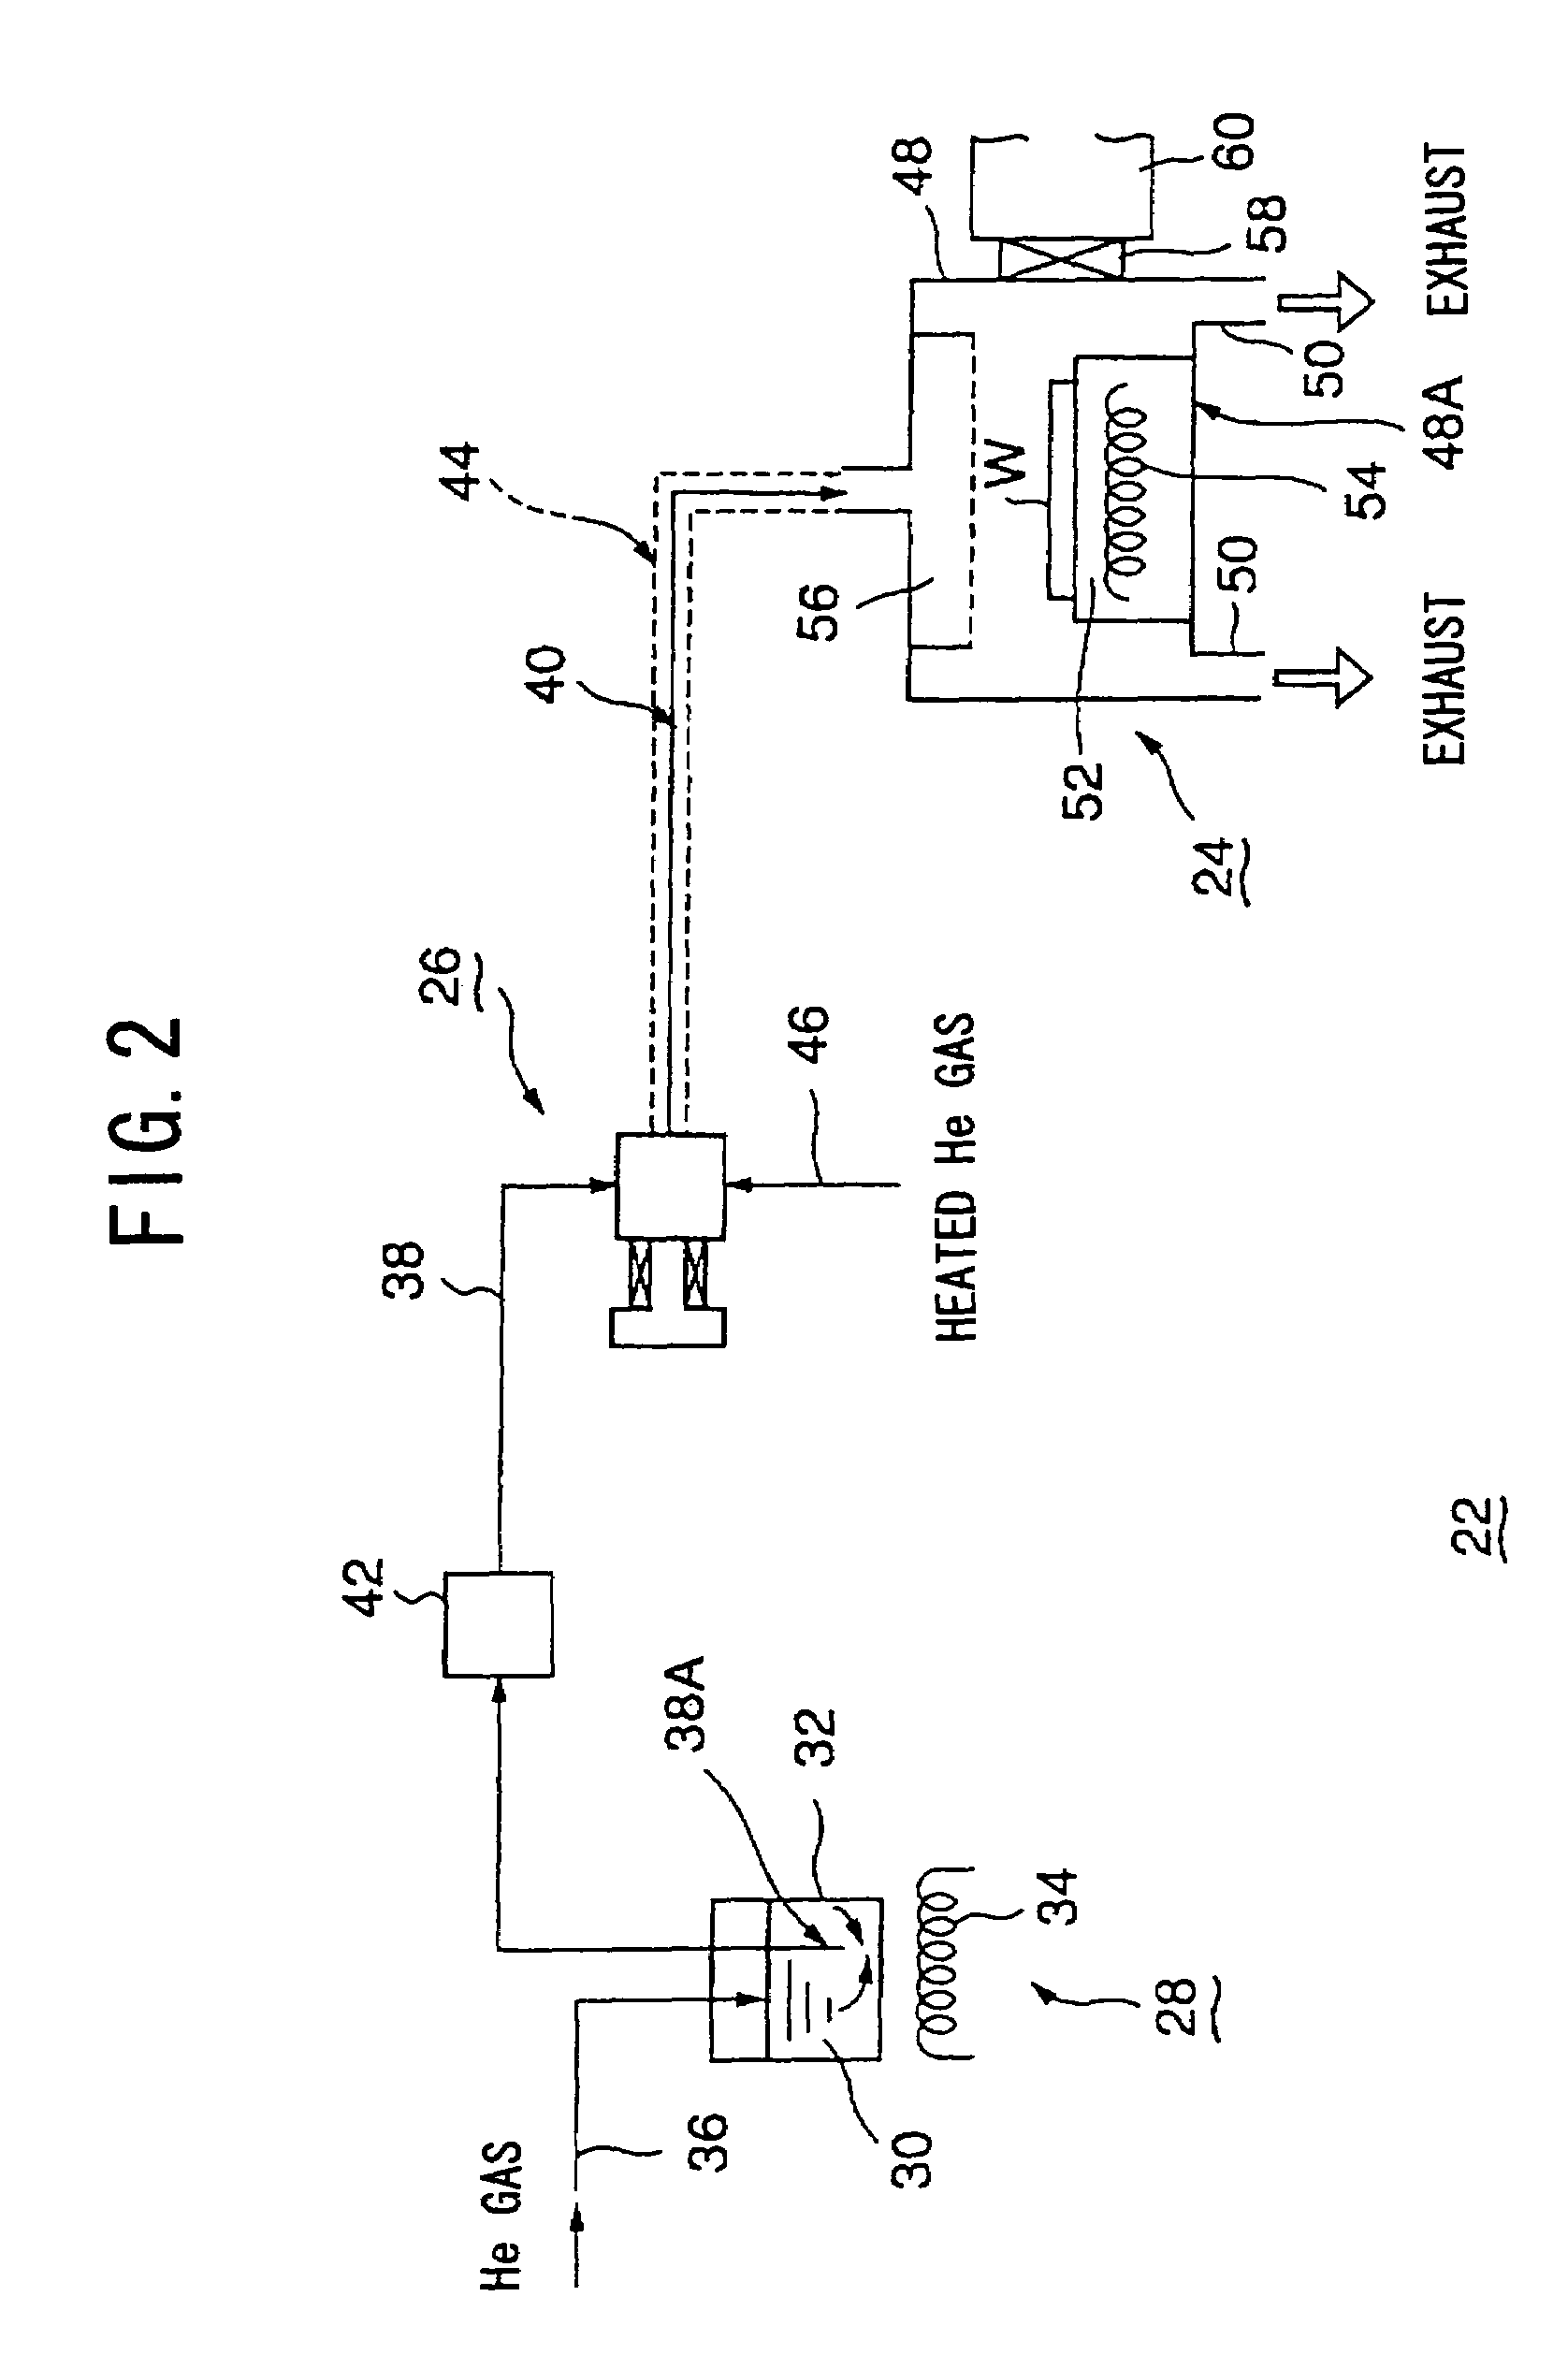 Semiconductor manufacturing system having a vaporizer which efficiently vaporizes a liquid material